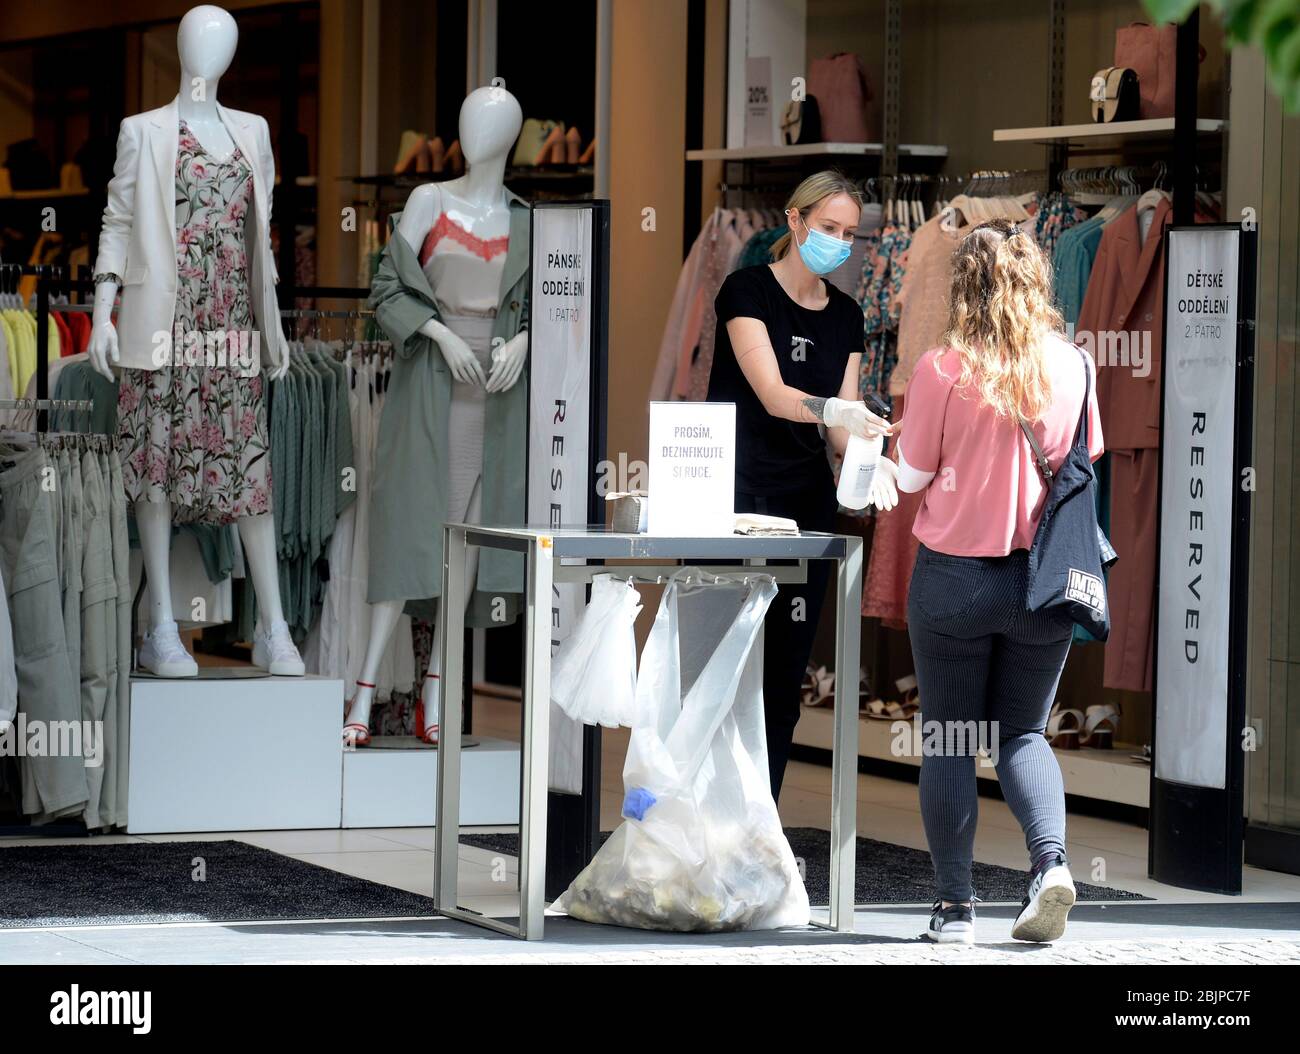 Prague, Czech Republic. 30th Apr, 2020. An employee, left, of Reserved clothing store helps a customer with hand disinfection at the entrance to the store, on April 30, 2020, in Prague, Czech Republic. The shops reopened on April 27 after a forced break due to coronavirus, but increased hygiene measures are in place. Credit: Katerina Sulova/CTK Photo/Alamy Live News Stock Photo